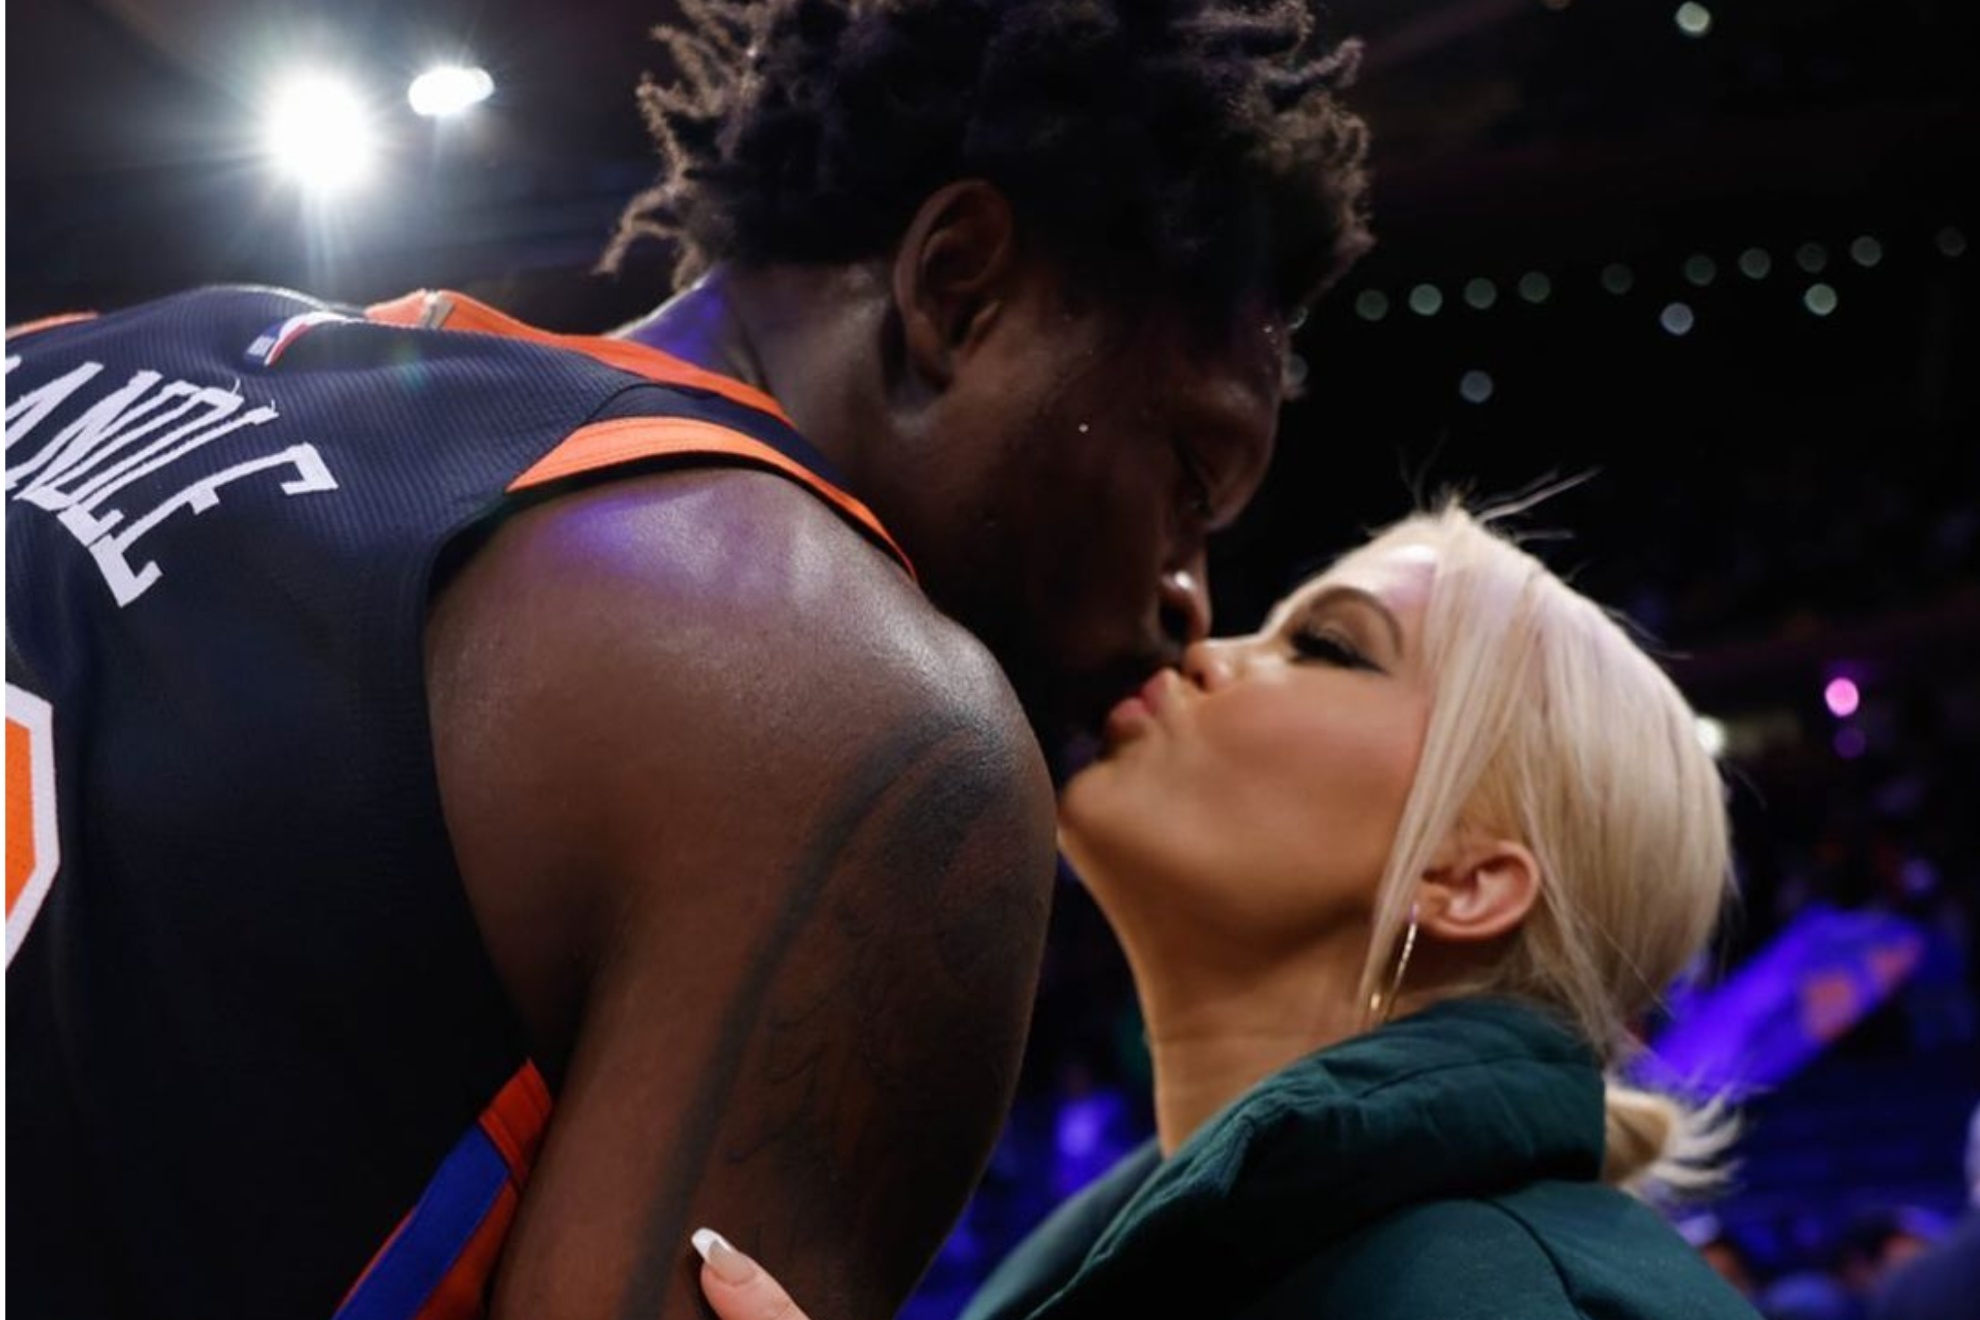 Many fans defended the kiss between Julius Randle and his wife after the game.